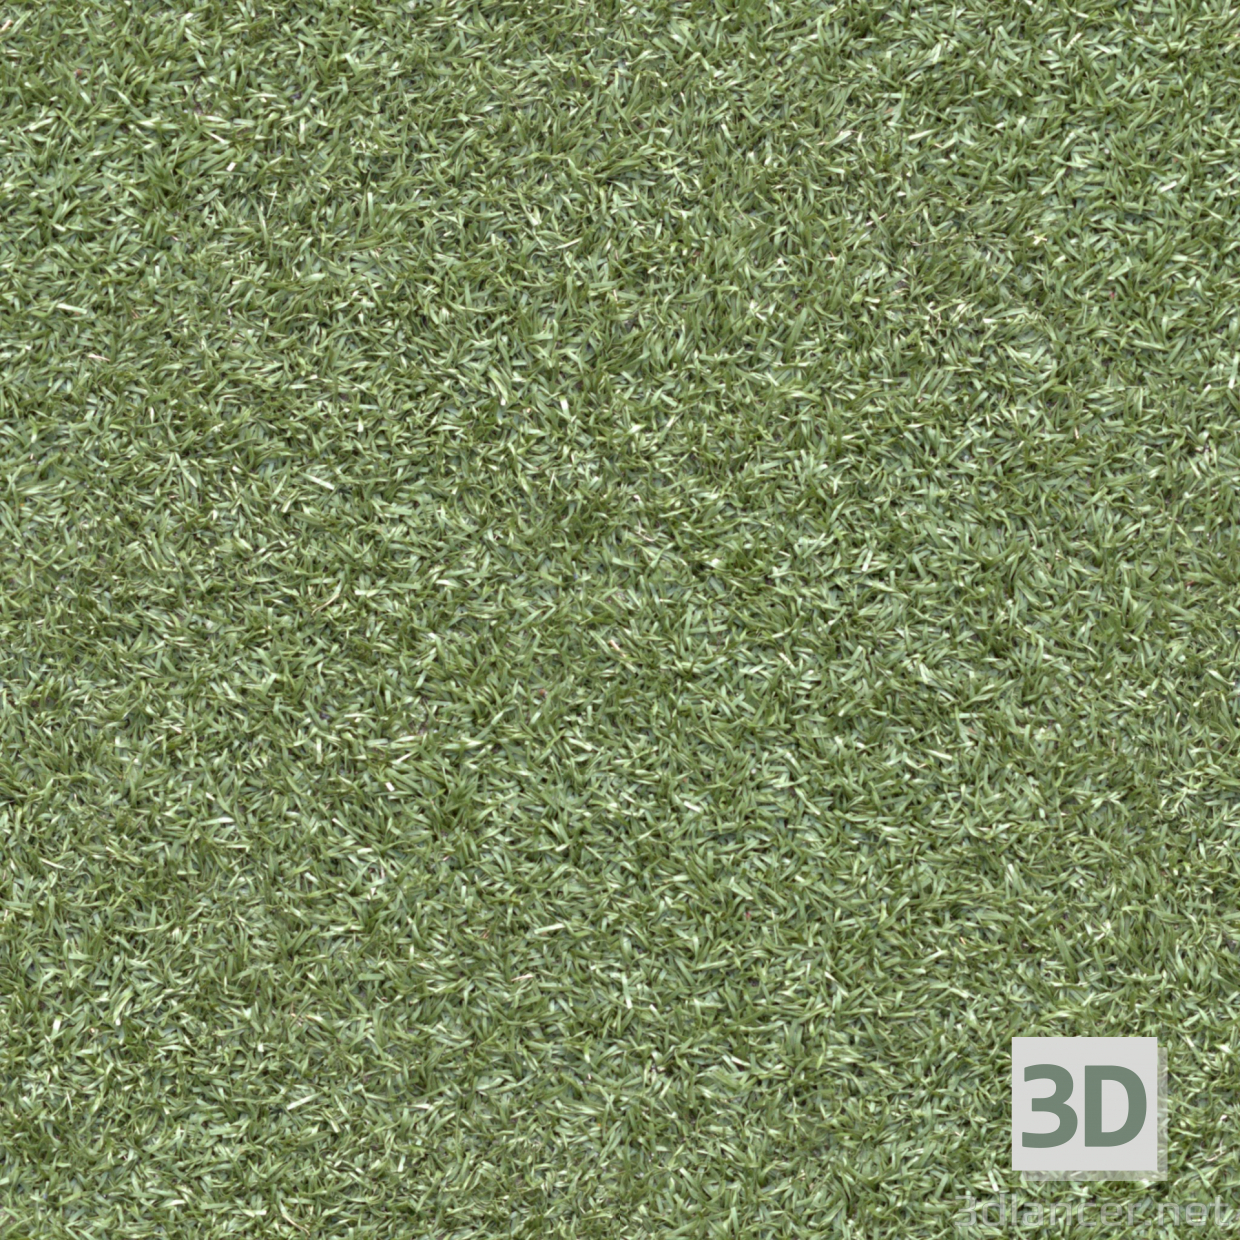 Texture Grass free download - image